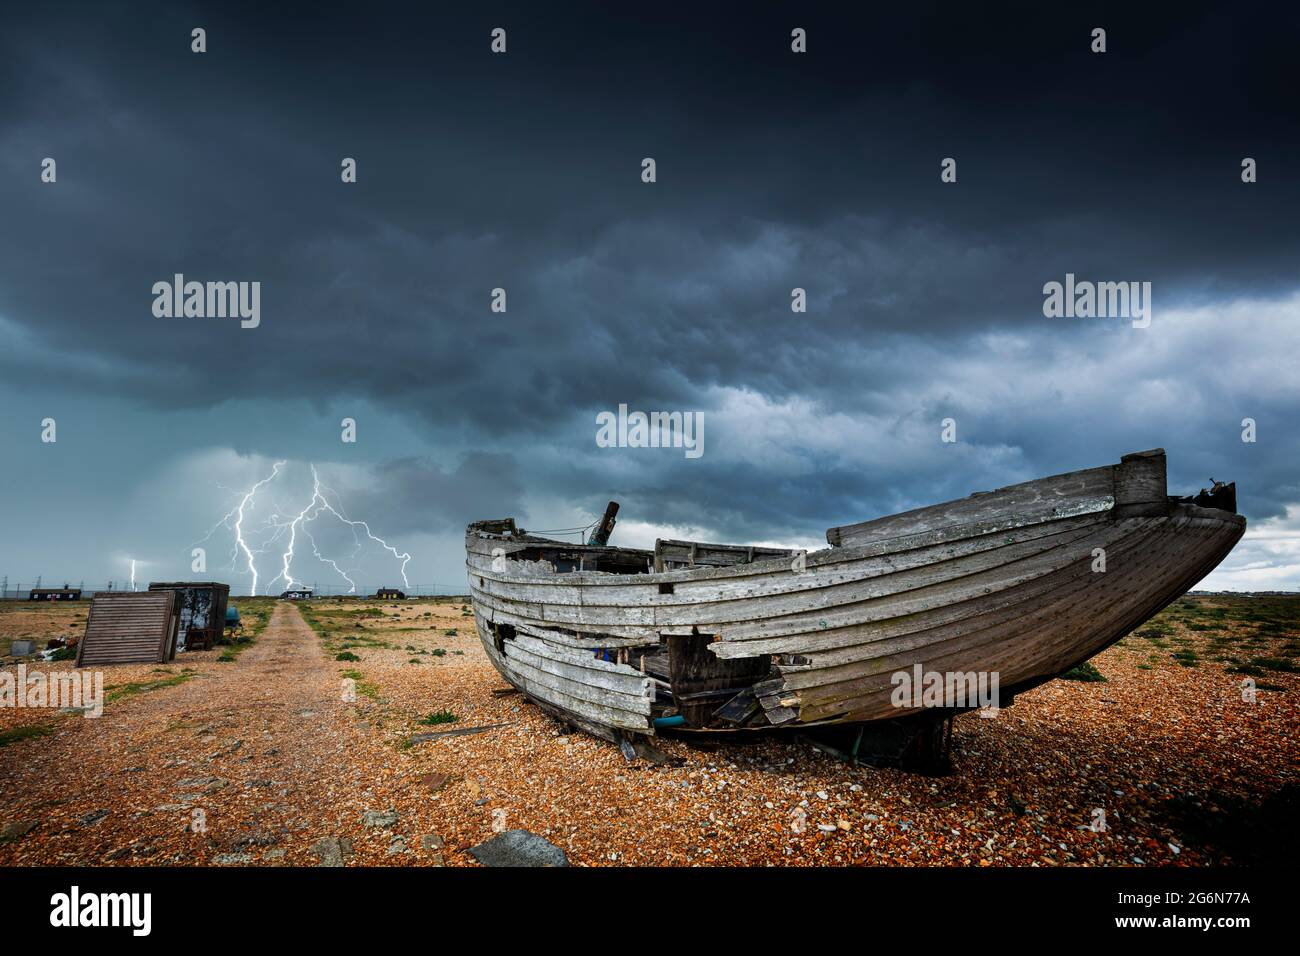 Wrecked boat in a storm on the shingle beach at Dungeness National Nature Reserve Kent England UK GB Europe Stock Photo